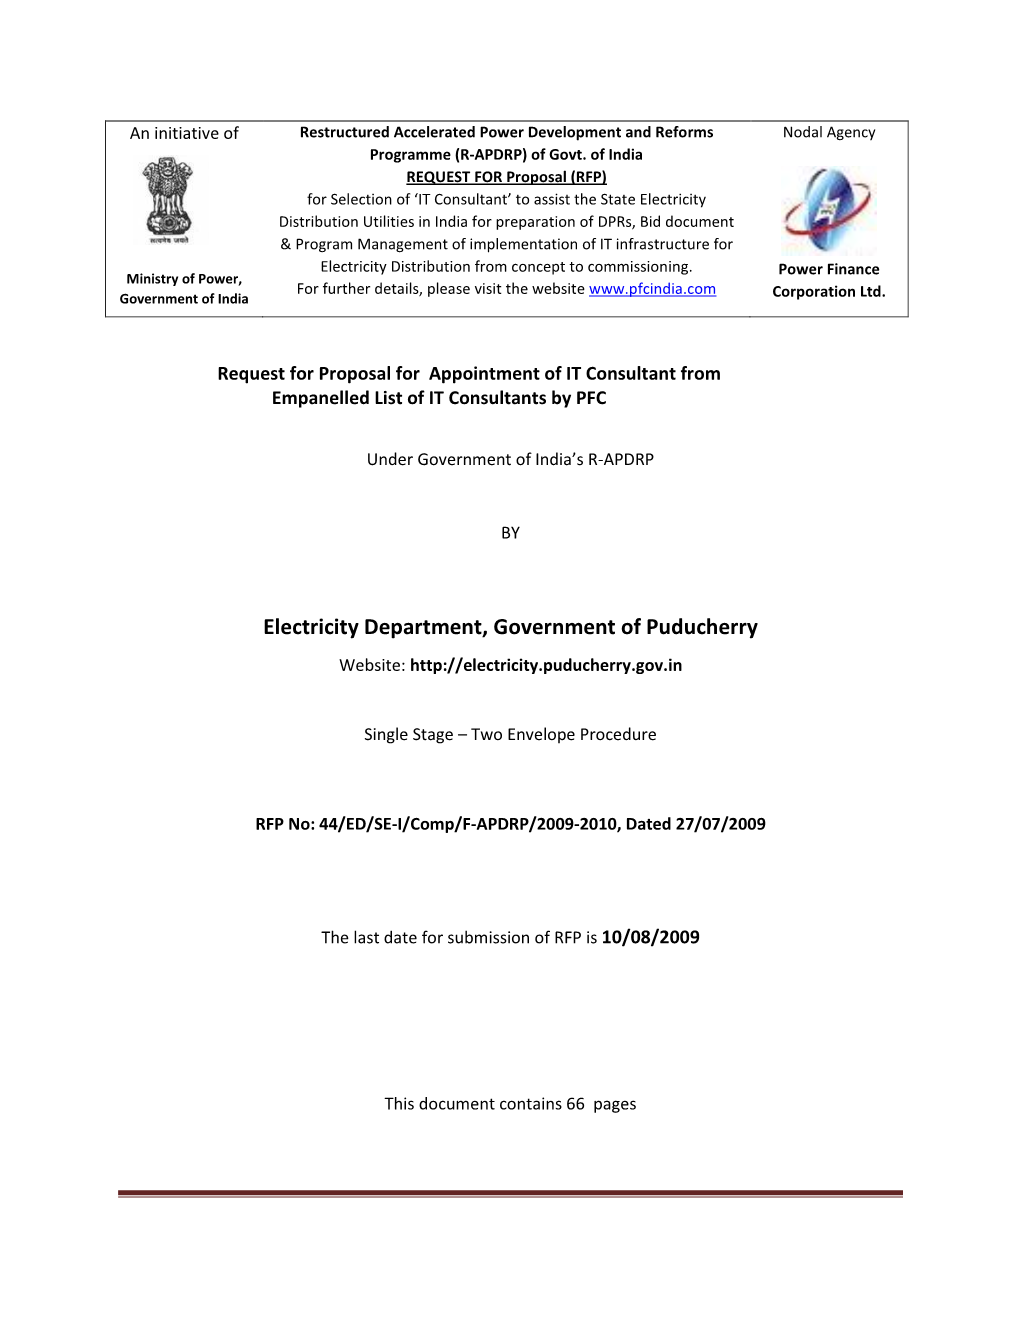 Electricity Department, Government of Puducherry Website